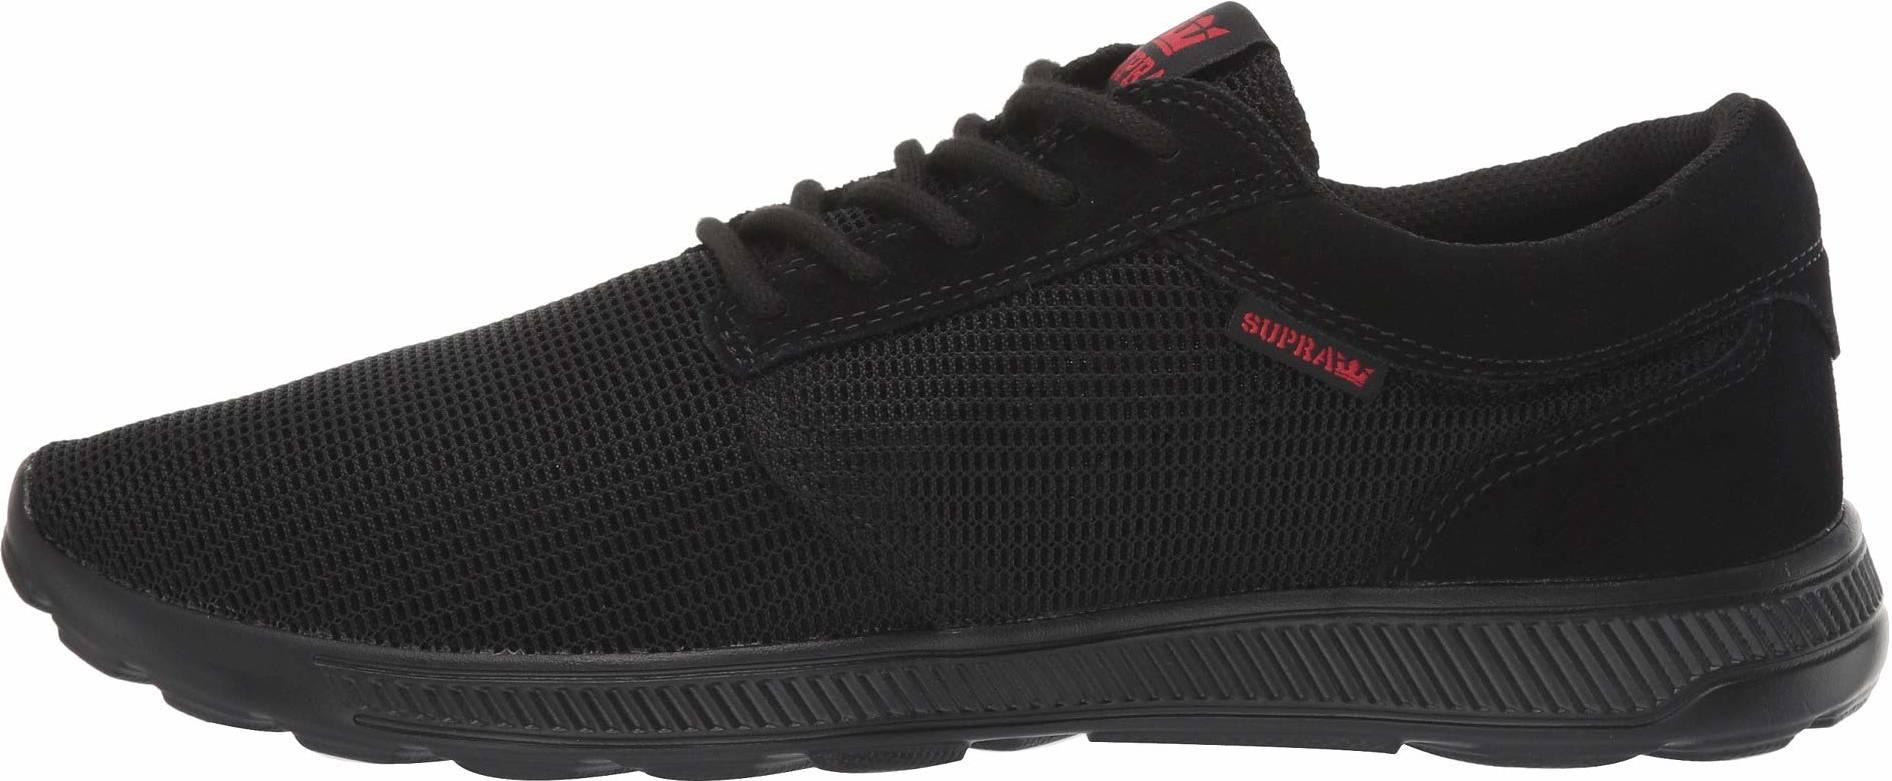 Only $19 + Review of Supra Hammer Run 